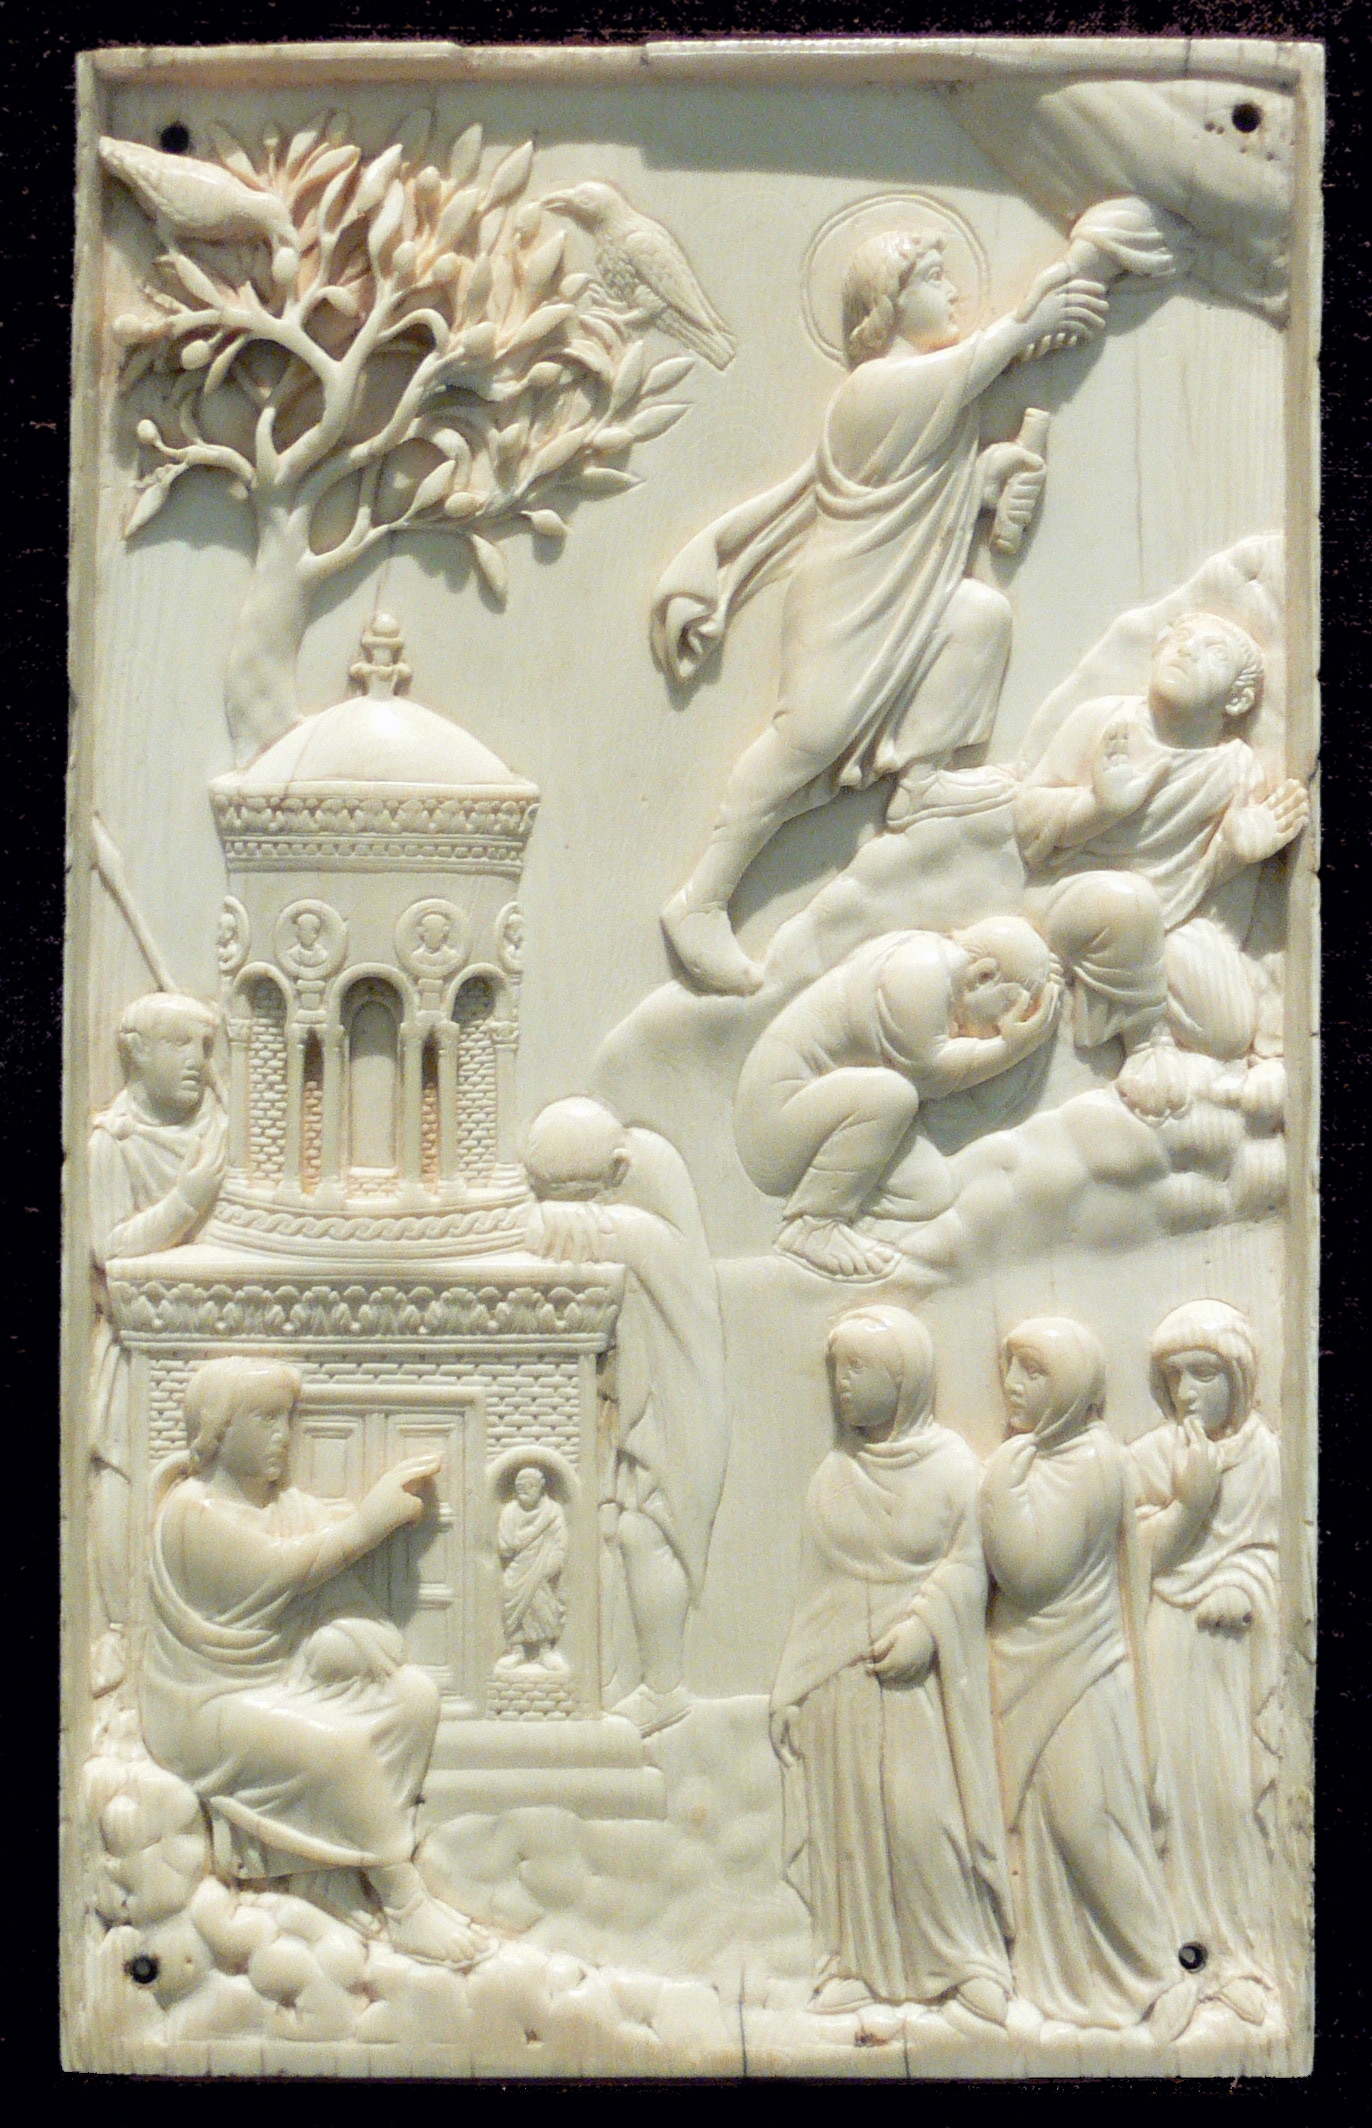 This ivory depiction of the Ascension was produced in Rome or Milan around 4th Century. vi Wikimedia